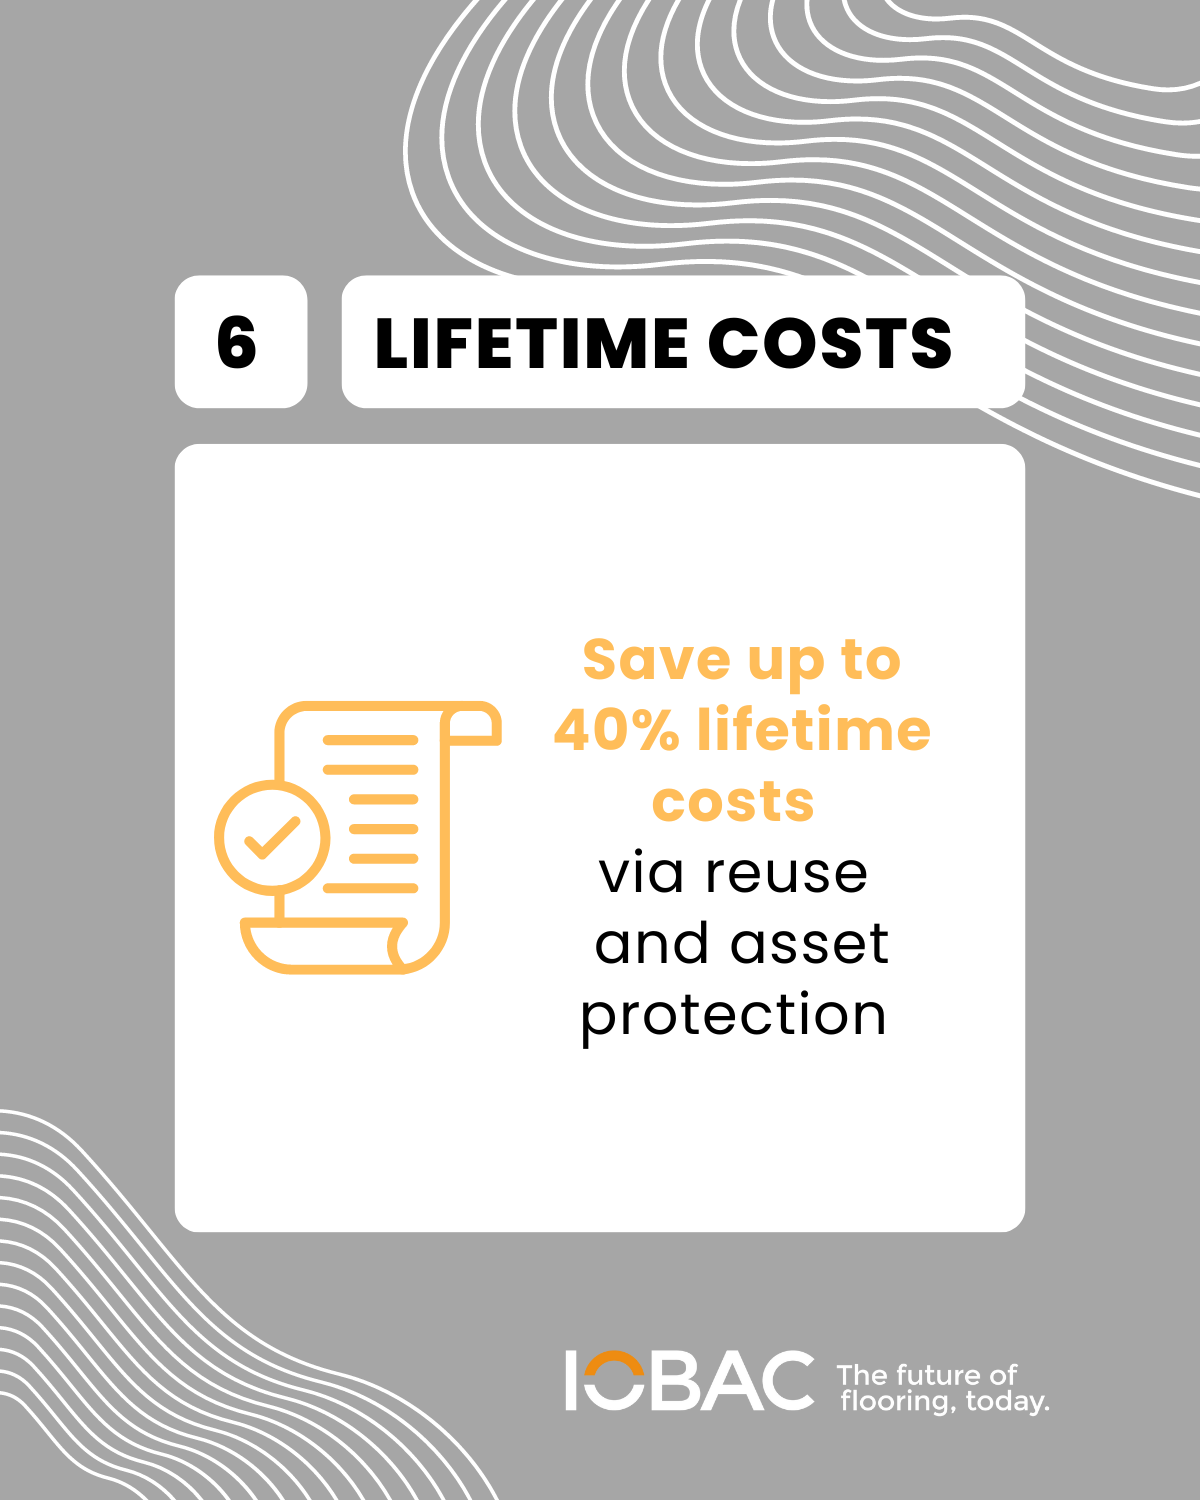 Reasons to Specify Adhesive-free Flooring - Lifetime costs